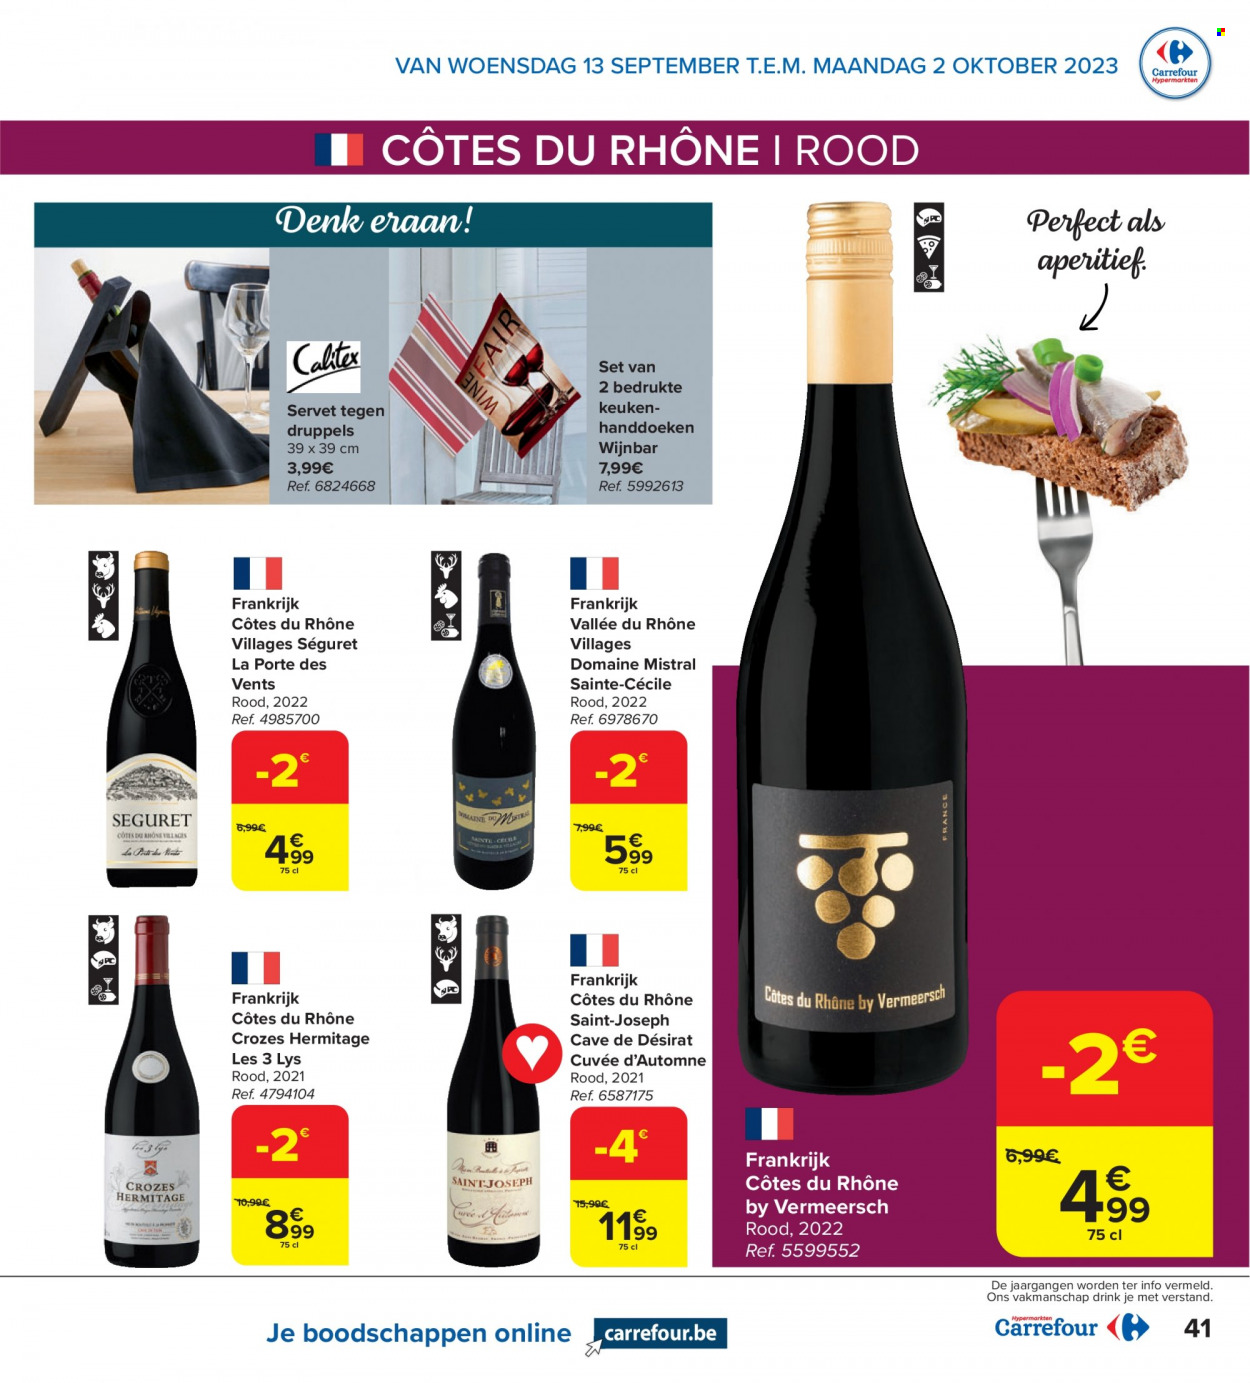 Catalogue Carrefour hypermarkt - 13.9.2023 - 2.10.2023. Page 13.